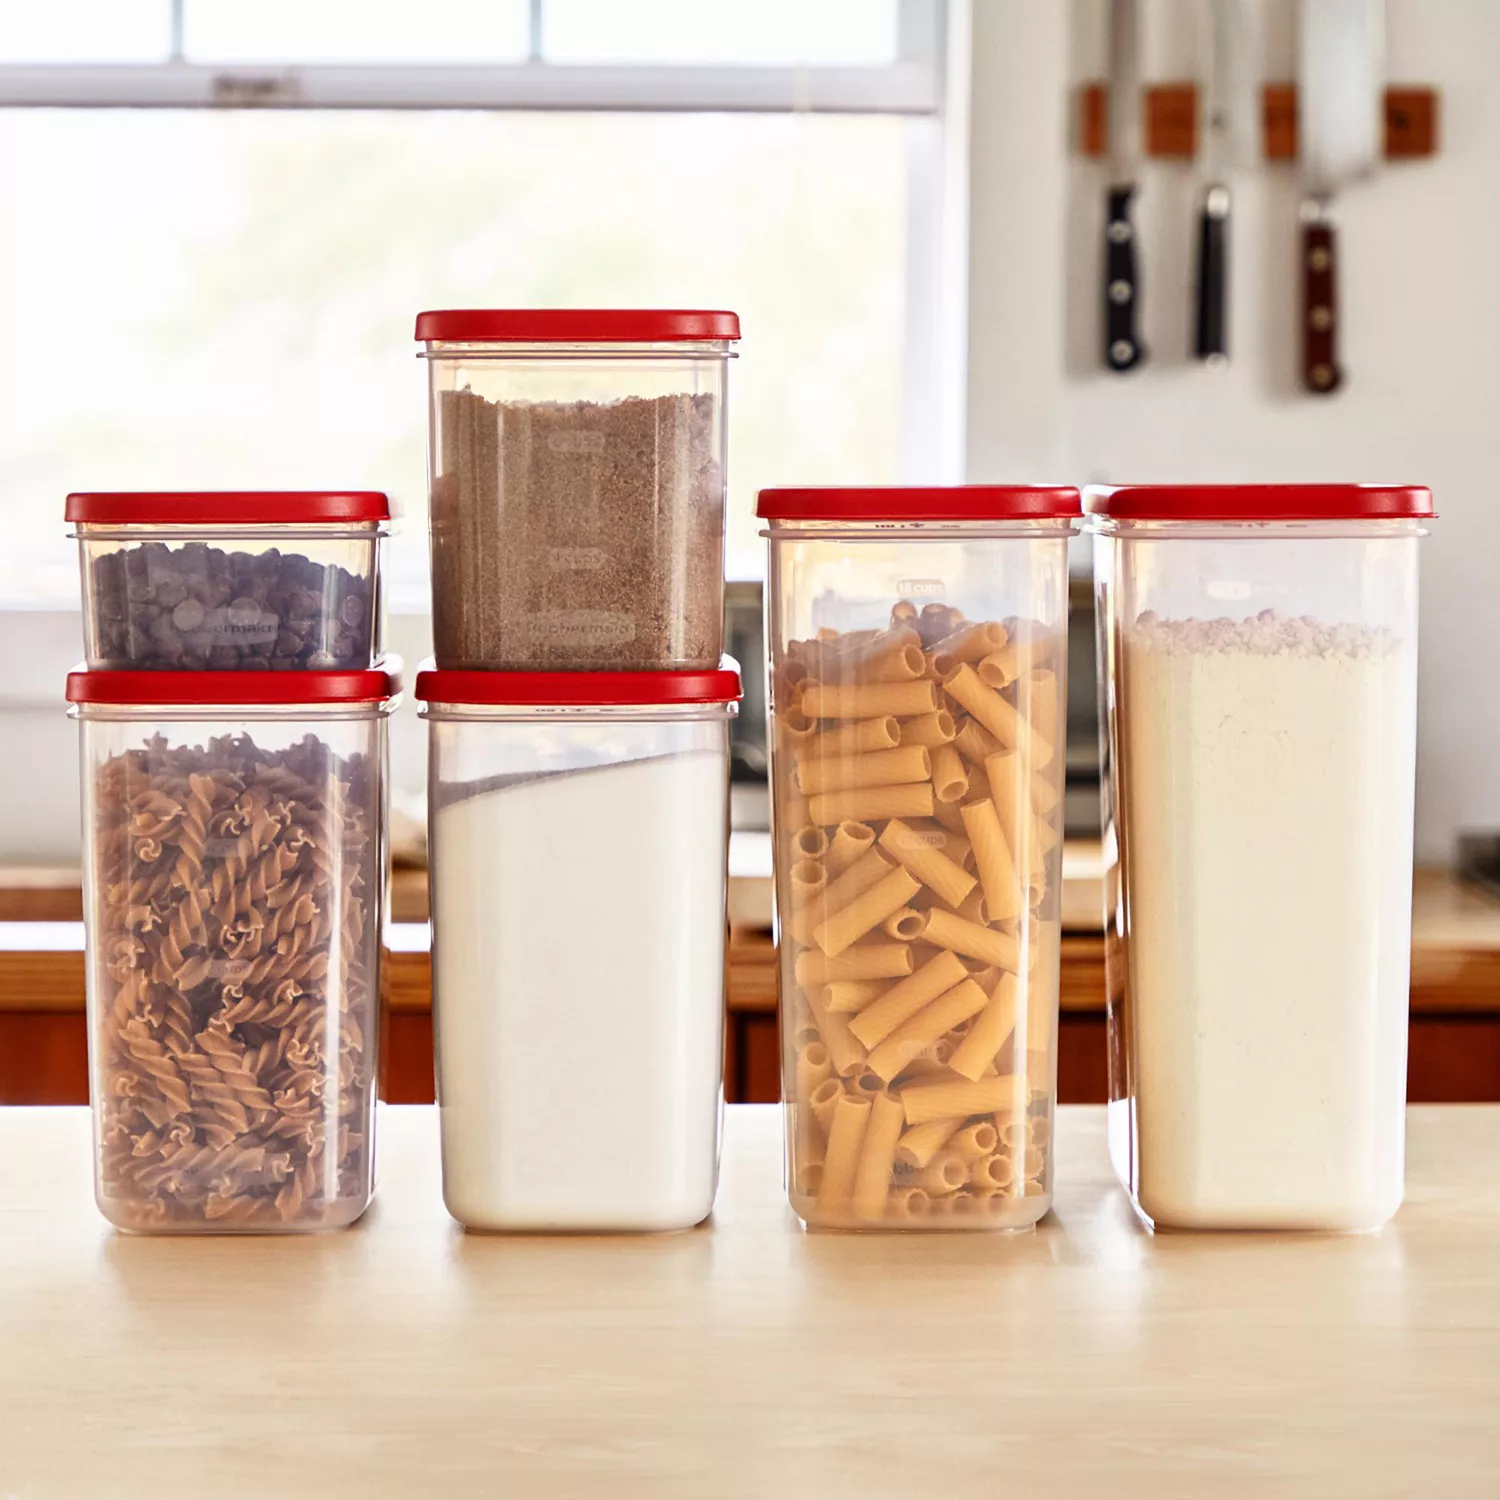 Buy From Fornaxmall.comModular Food Storage and Pantry 12-Piece Set